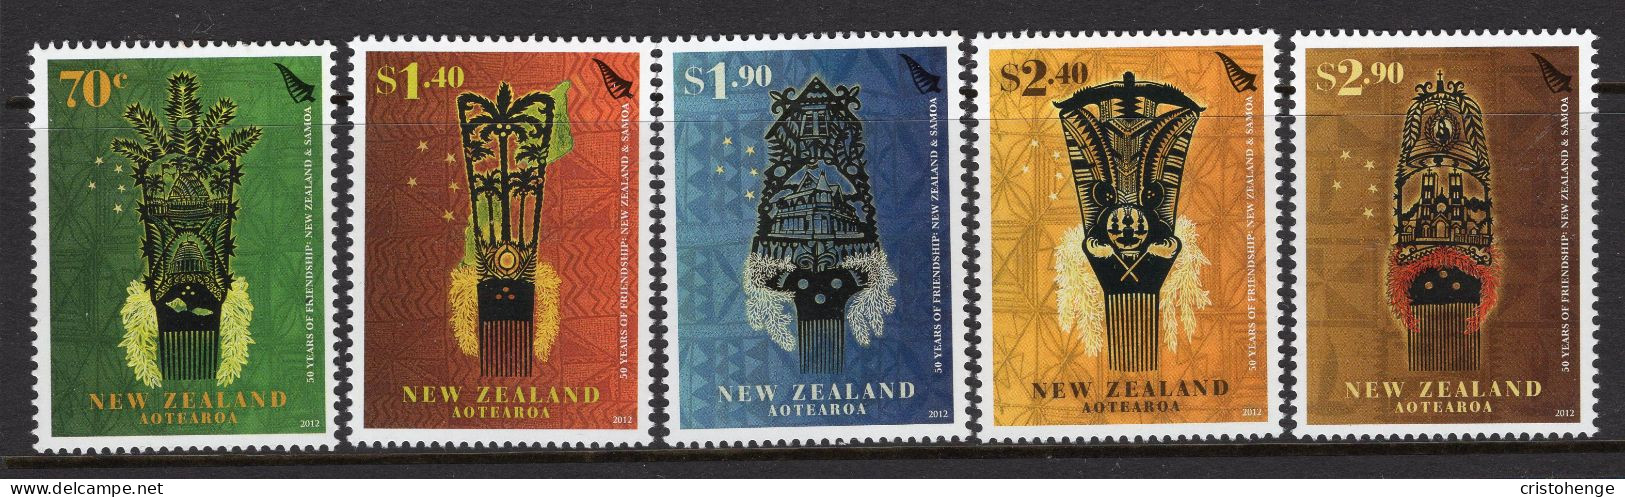 New Zealand 2012 50th Anniversary Of Treaty Of Friendship With Samoa Set MNH (SG 3380-3384) - Unused Stamps